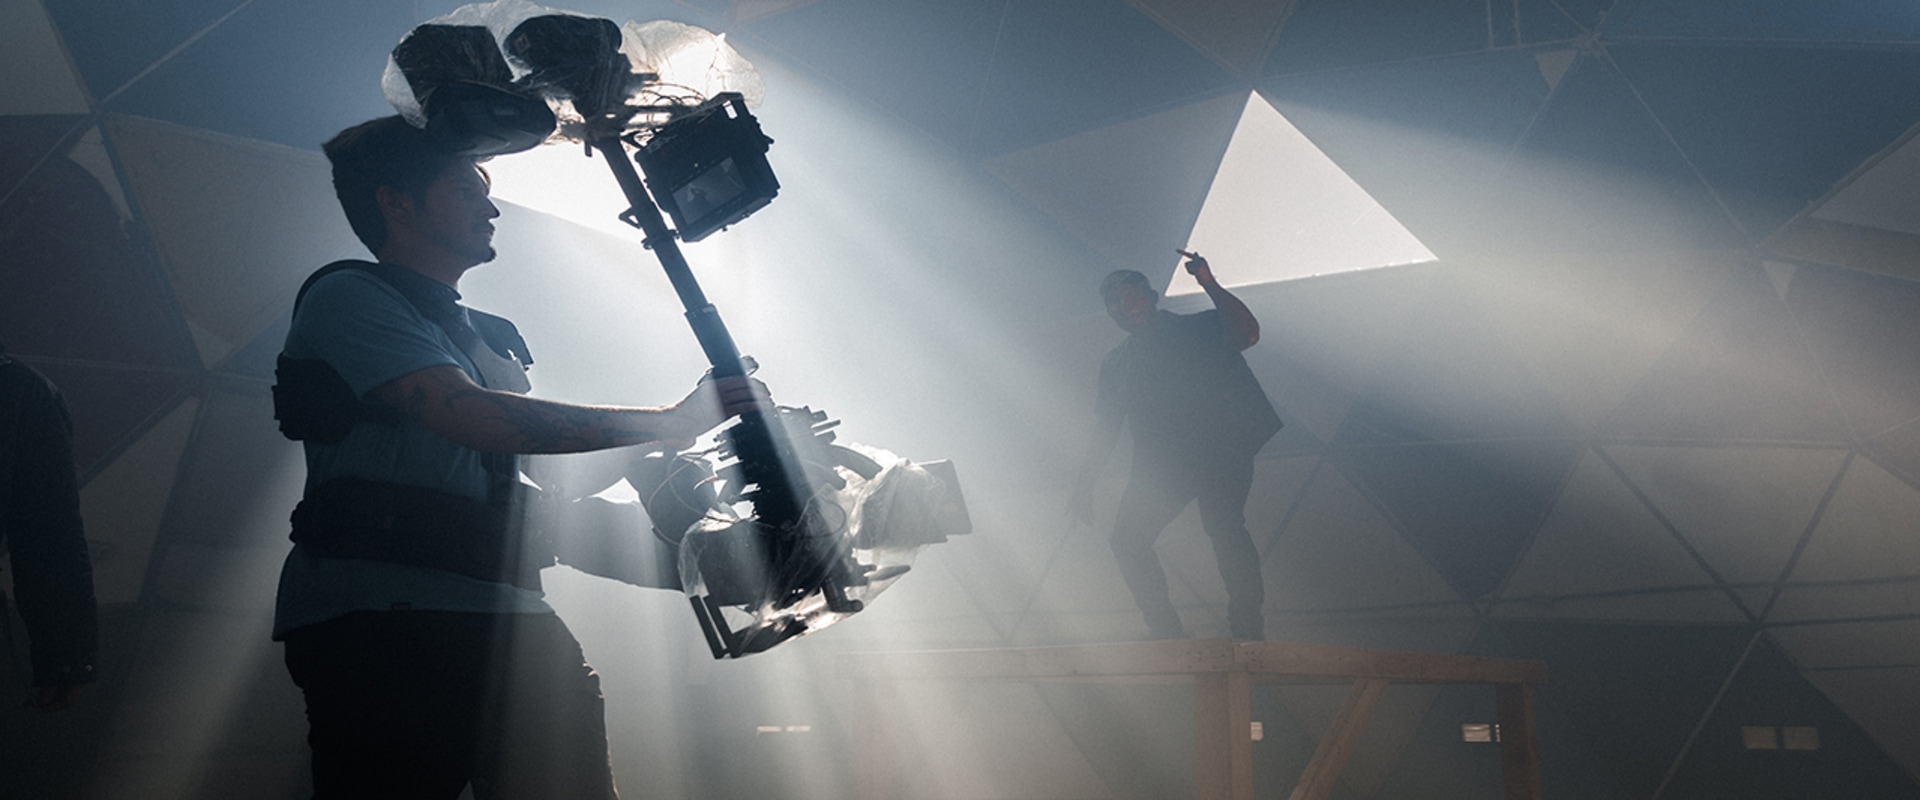 Renting Camera Equipment for Film Production: What You Need to Know